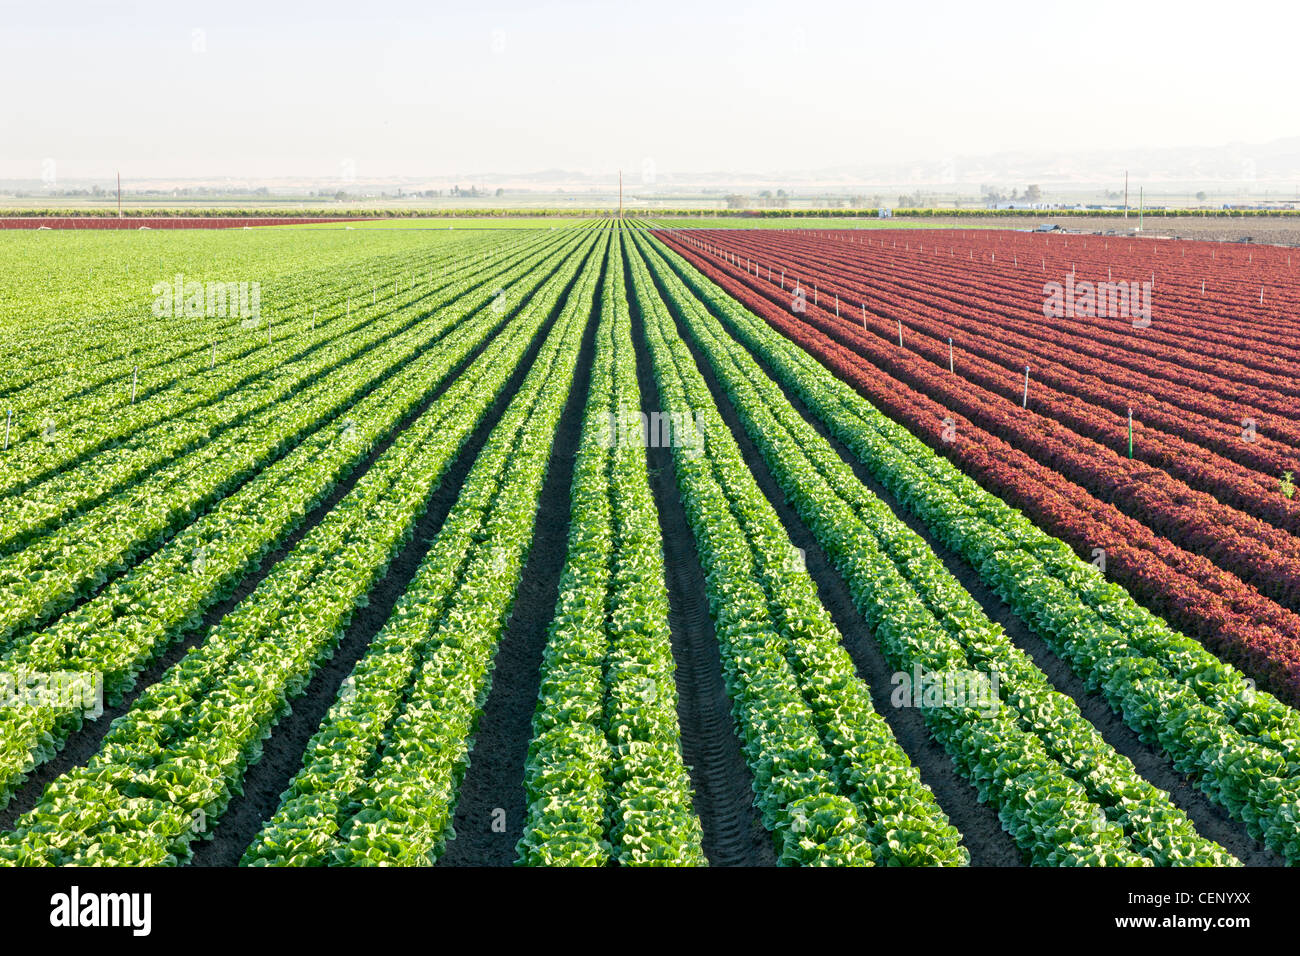 Rows of Romaine & Red Leaf Lettuce. Stock Photo